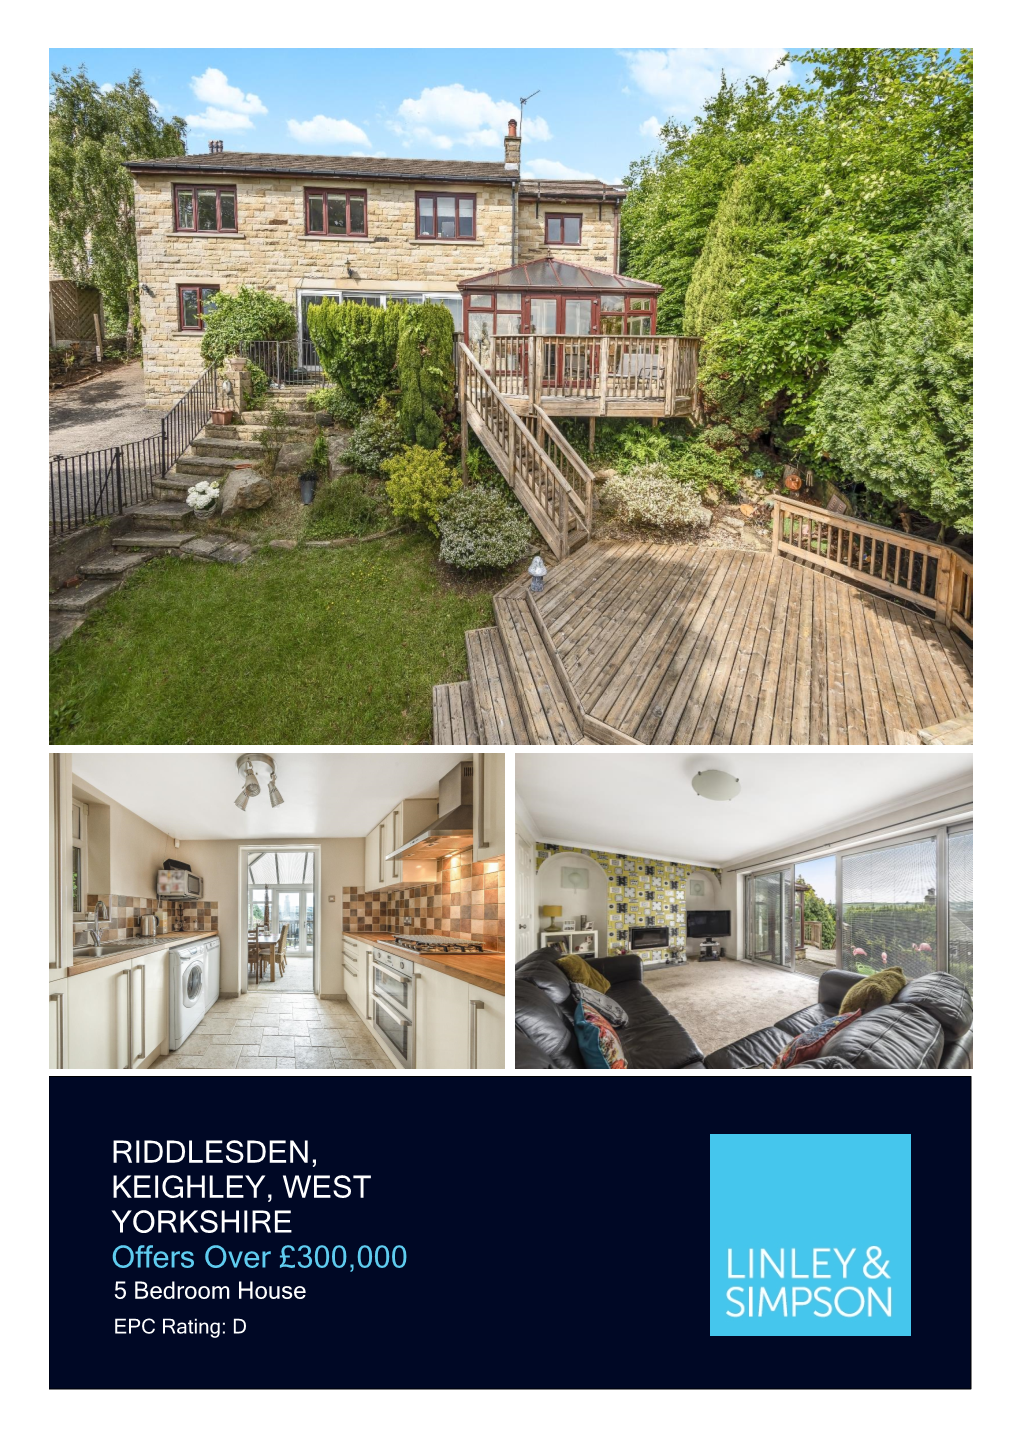 RIDDLESDEN, KEIGHLEY, WEST YORKSHIRE Offers Over £300,000 5 Bedroom House EPC Rating: D If You’Re Seeking the Unique … Look No Further